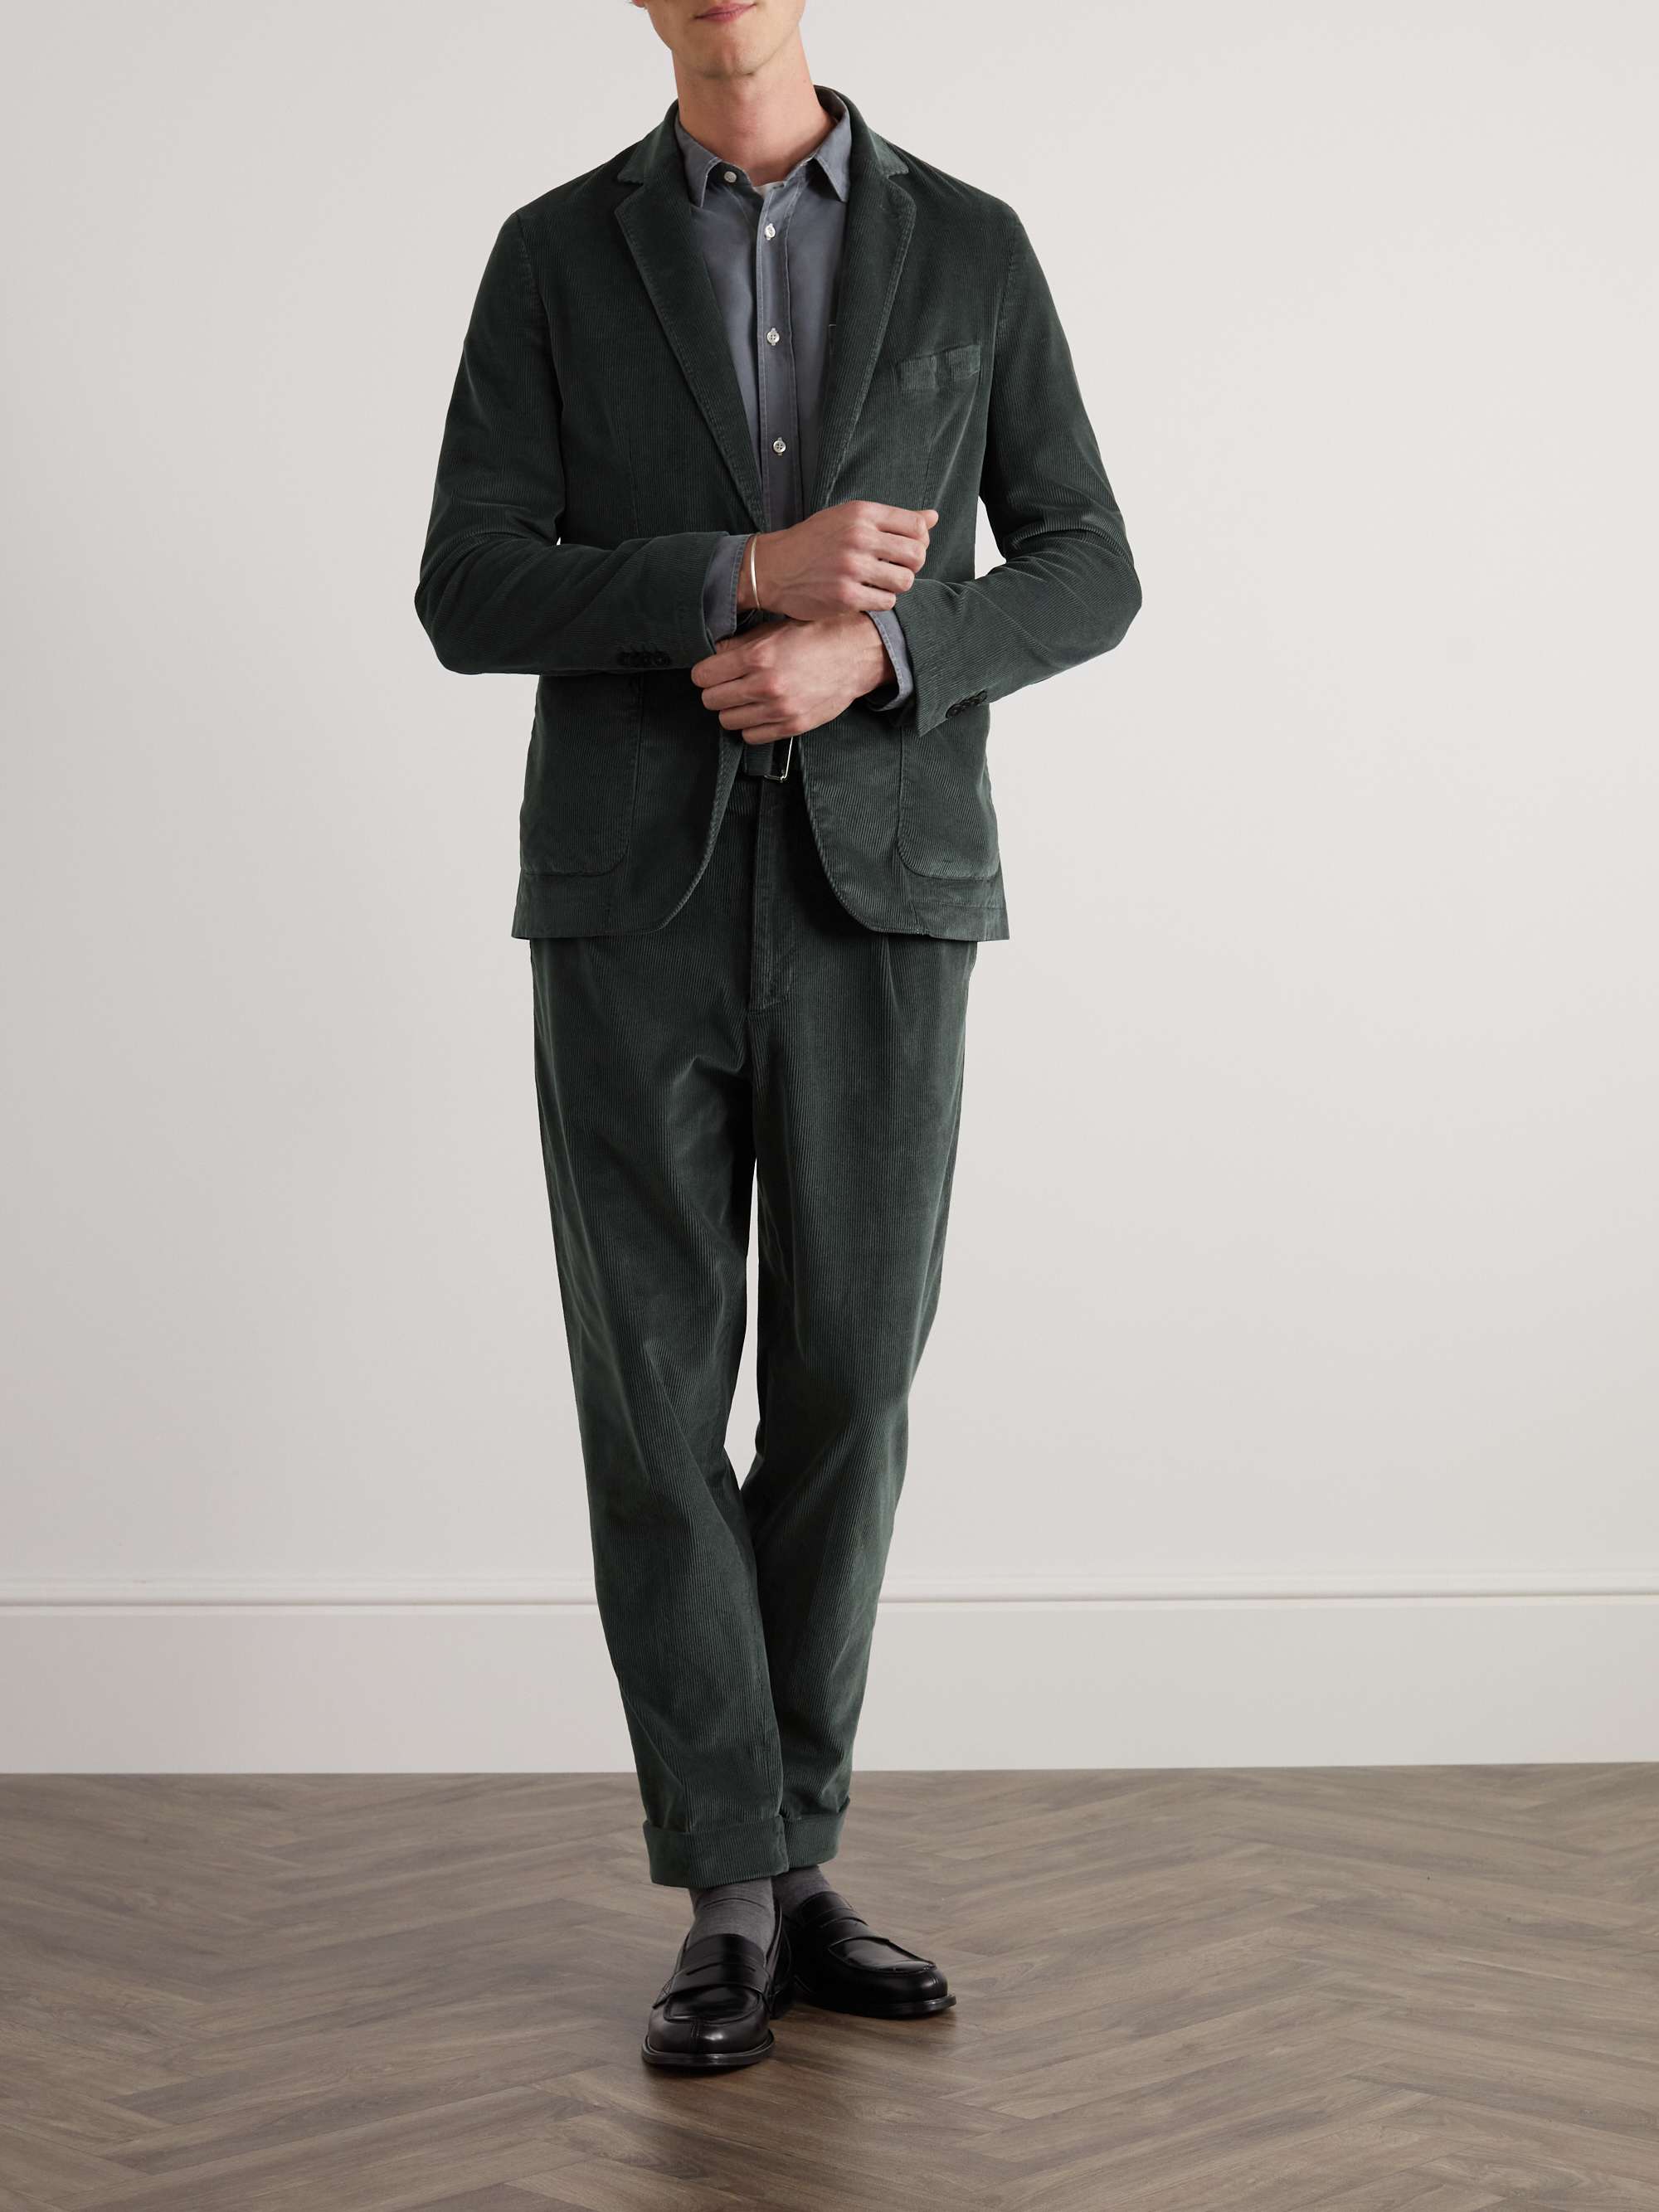 OFFICINE GÉNÉRALE Hugo Tapered Belted Cotton-Blend Corduroy Trousers ...